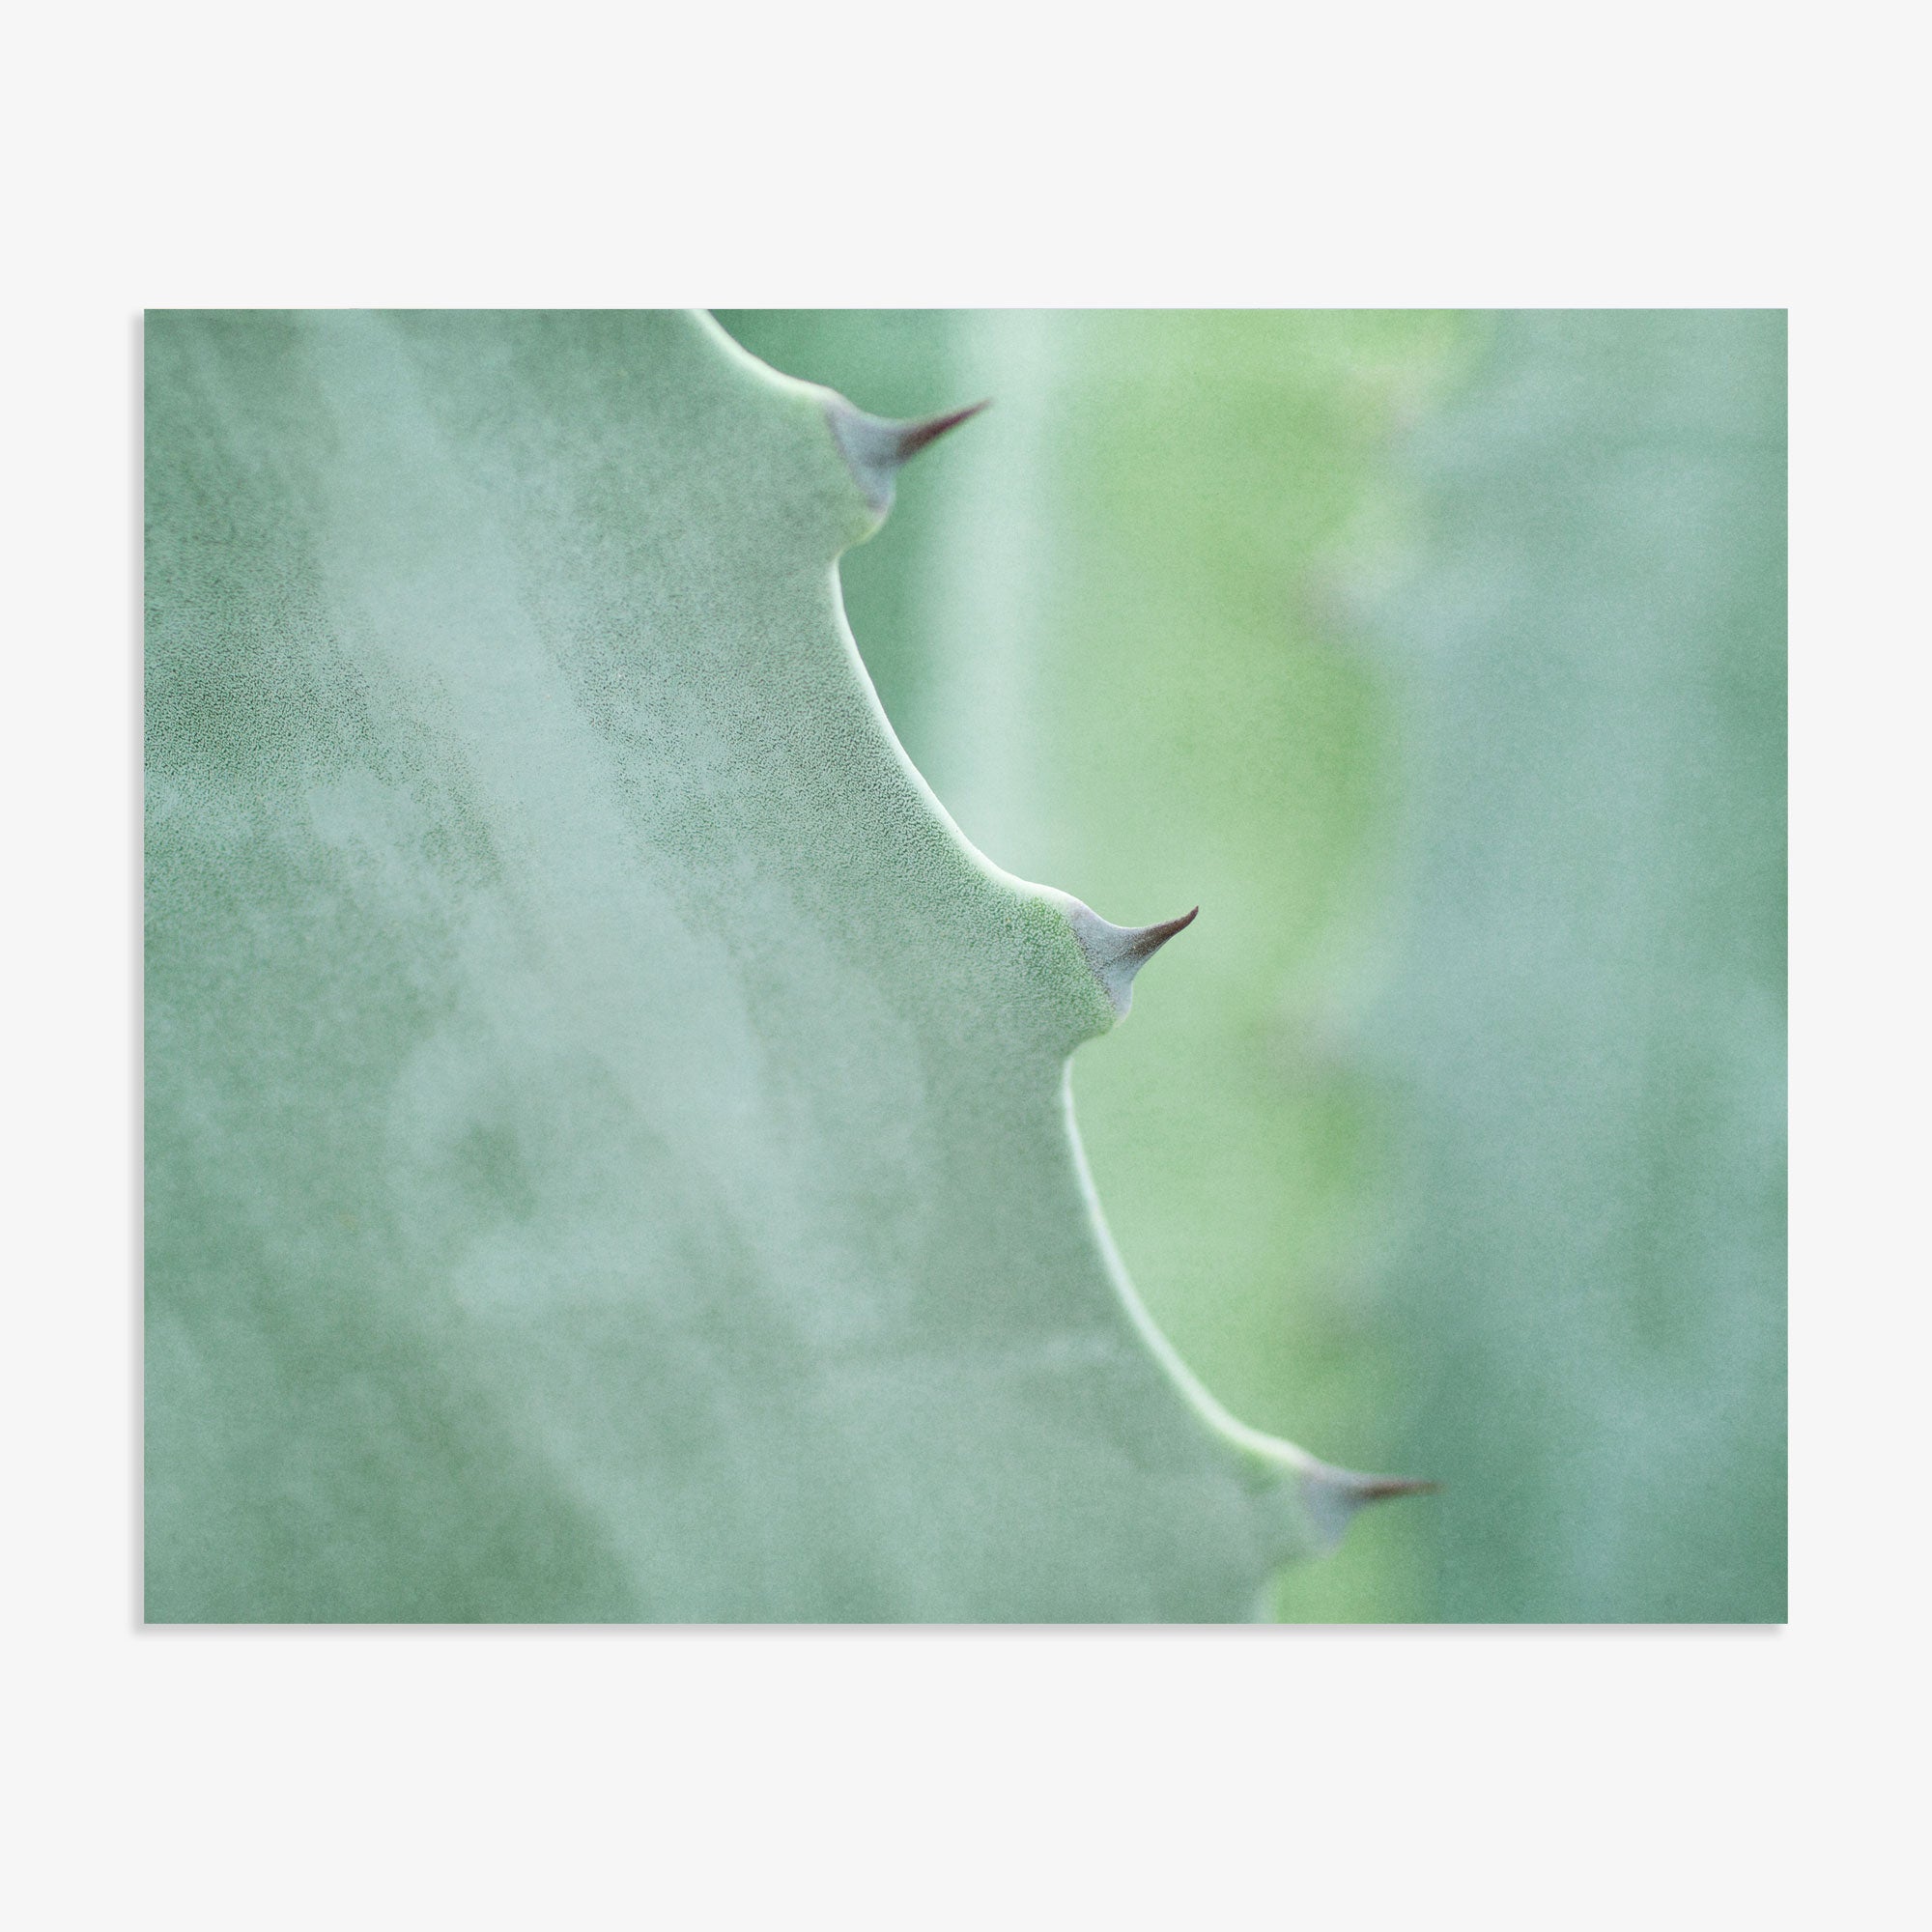 Close-up of a green Offley Green Aloe Vera Spikes print showing its texture and the sharp, brown-tipped thorns along its edge, with a blurred green background.